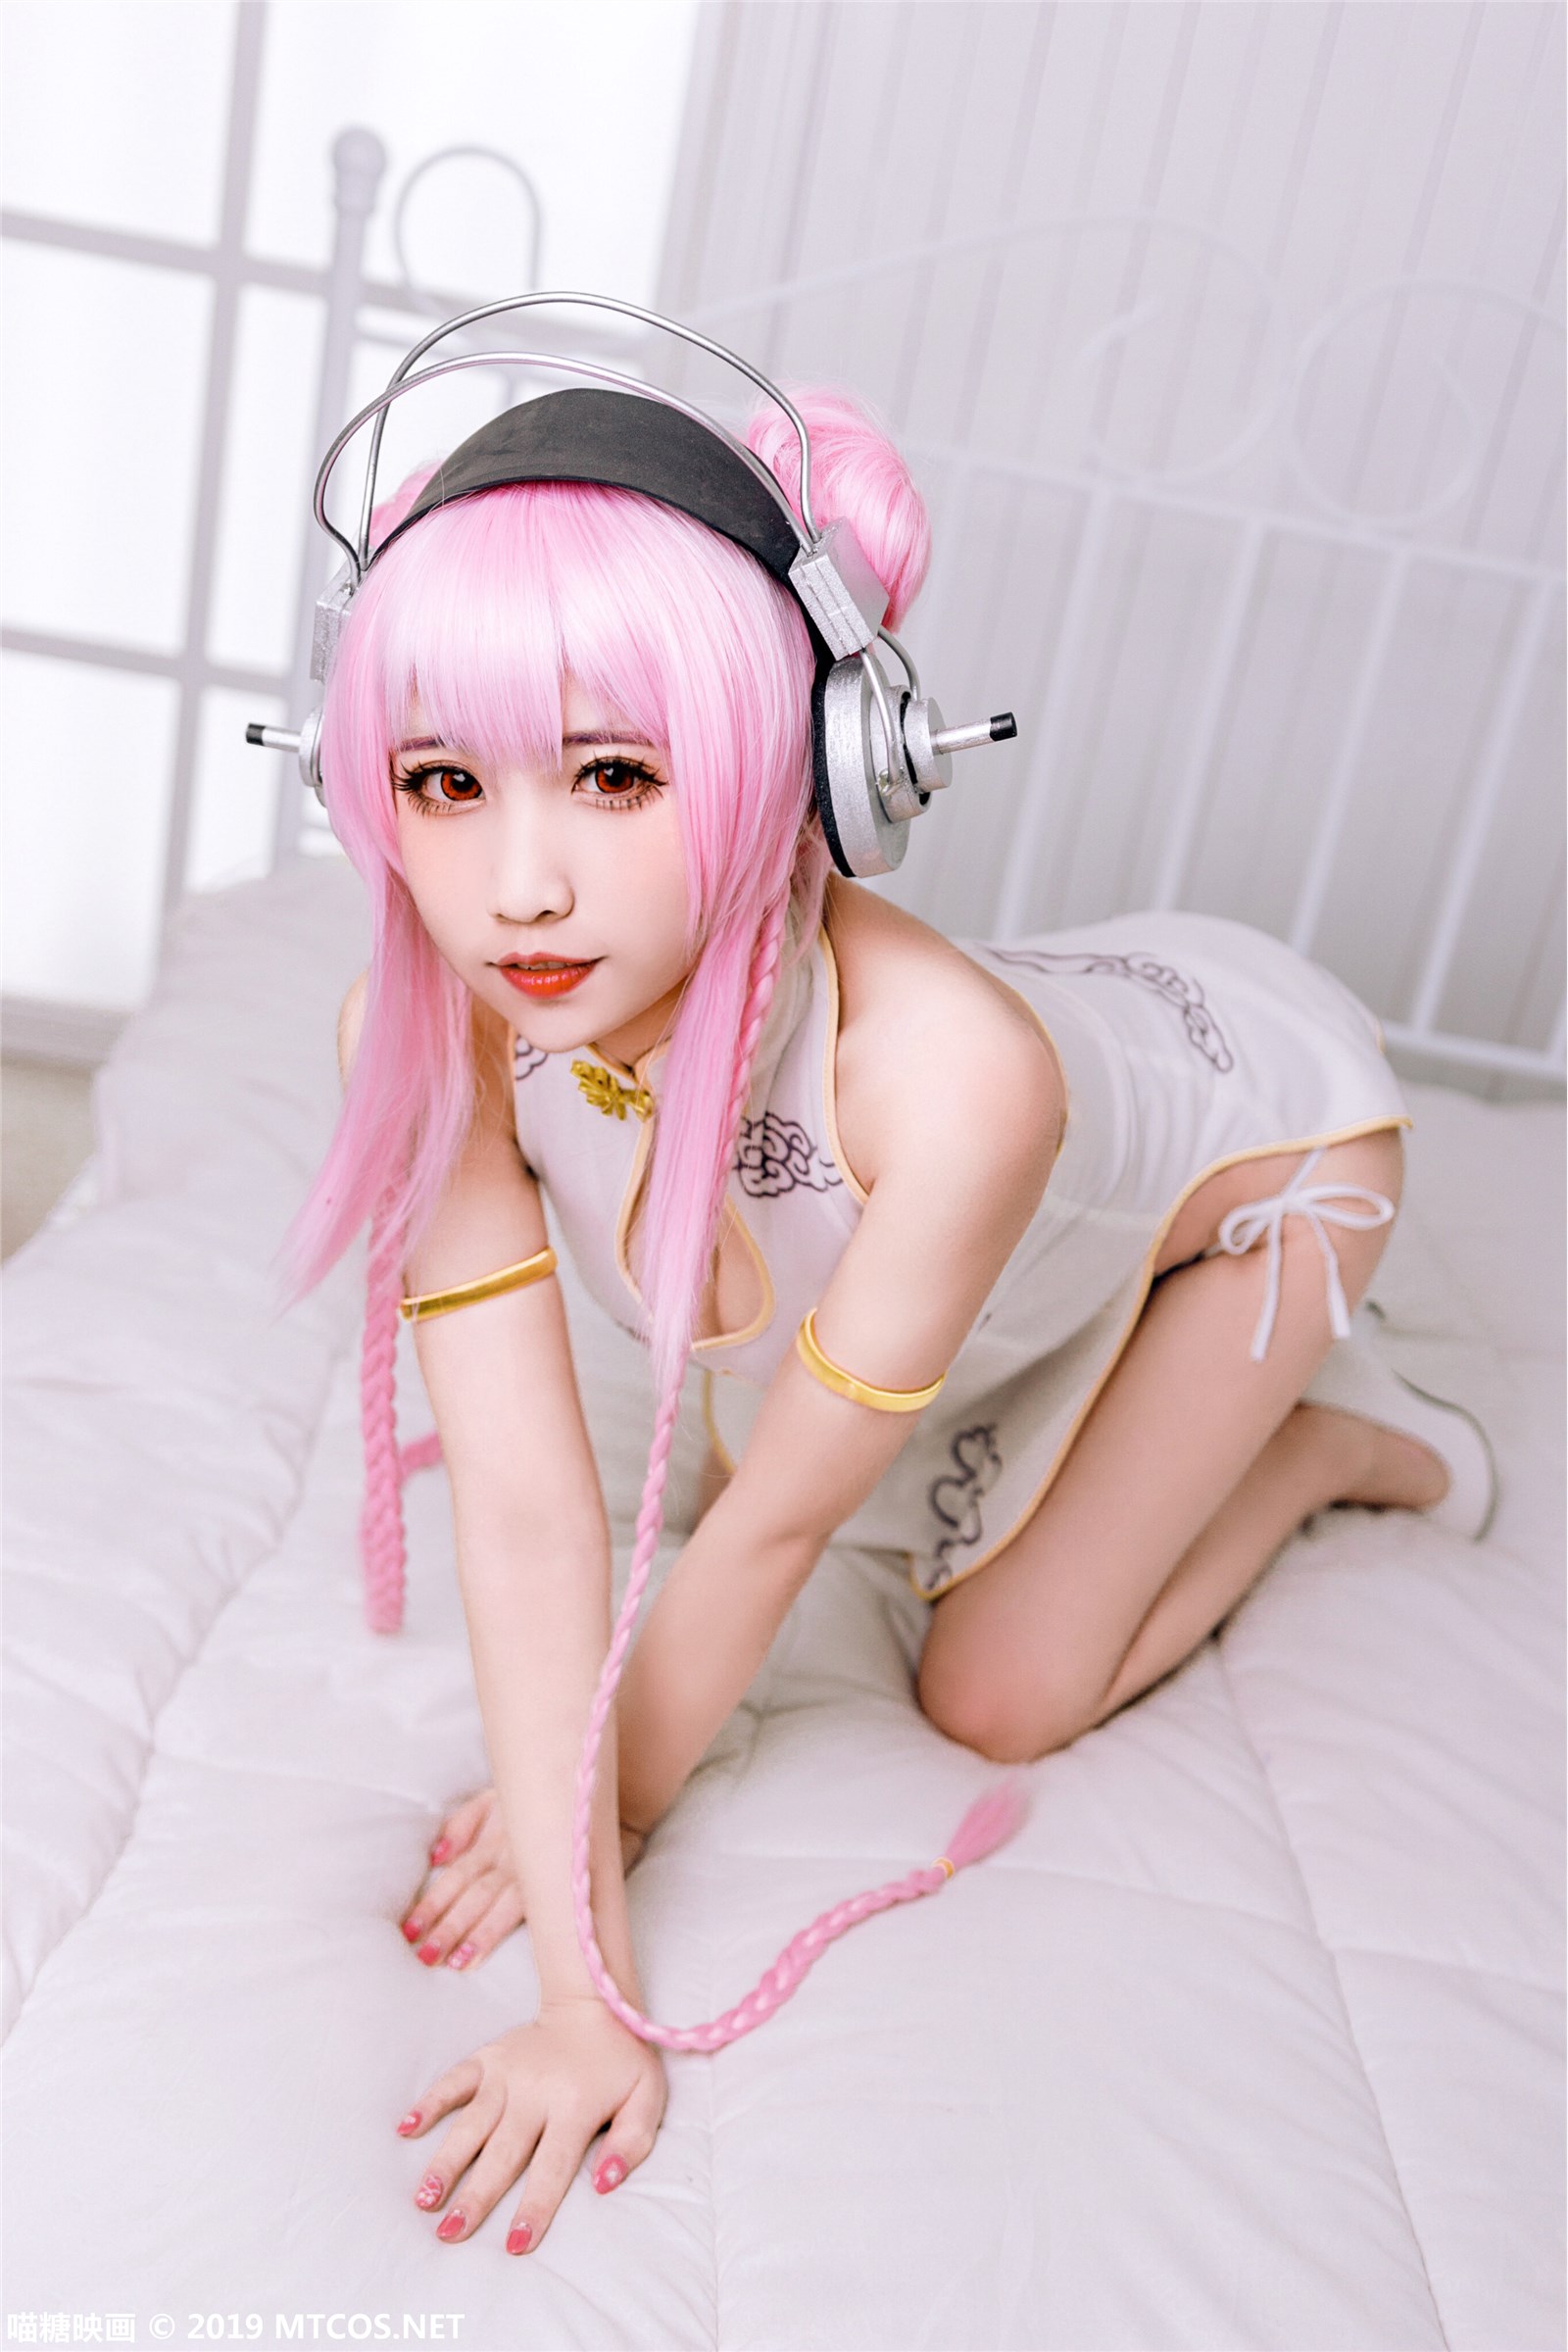 Meow sugar reflects the passion of Sony in Vol.050(20)